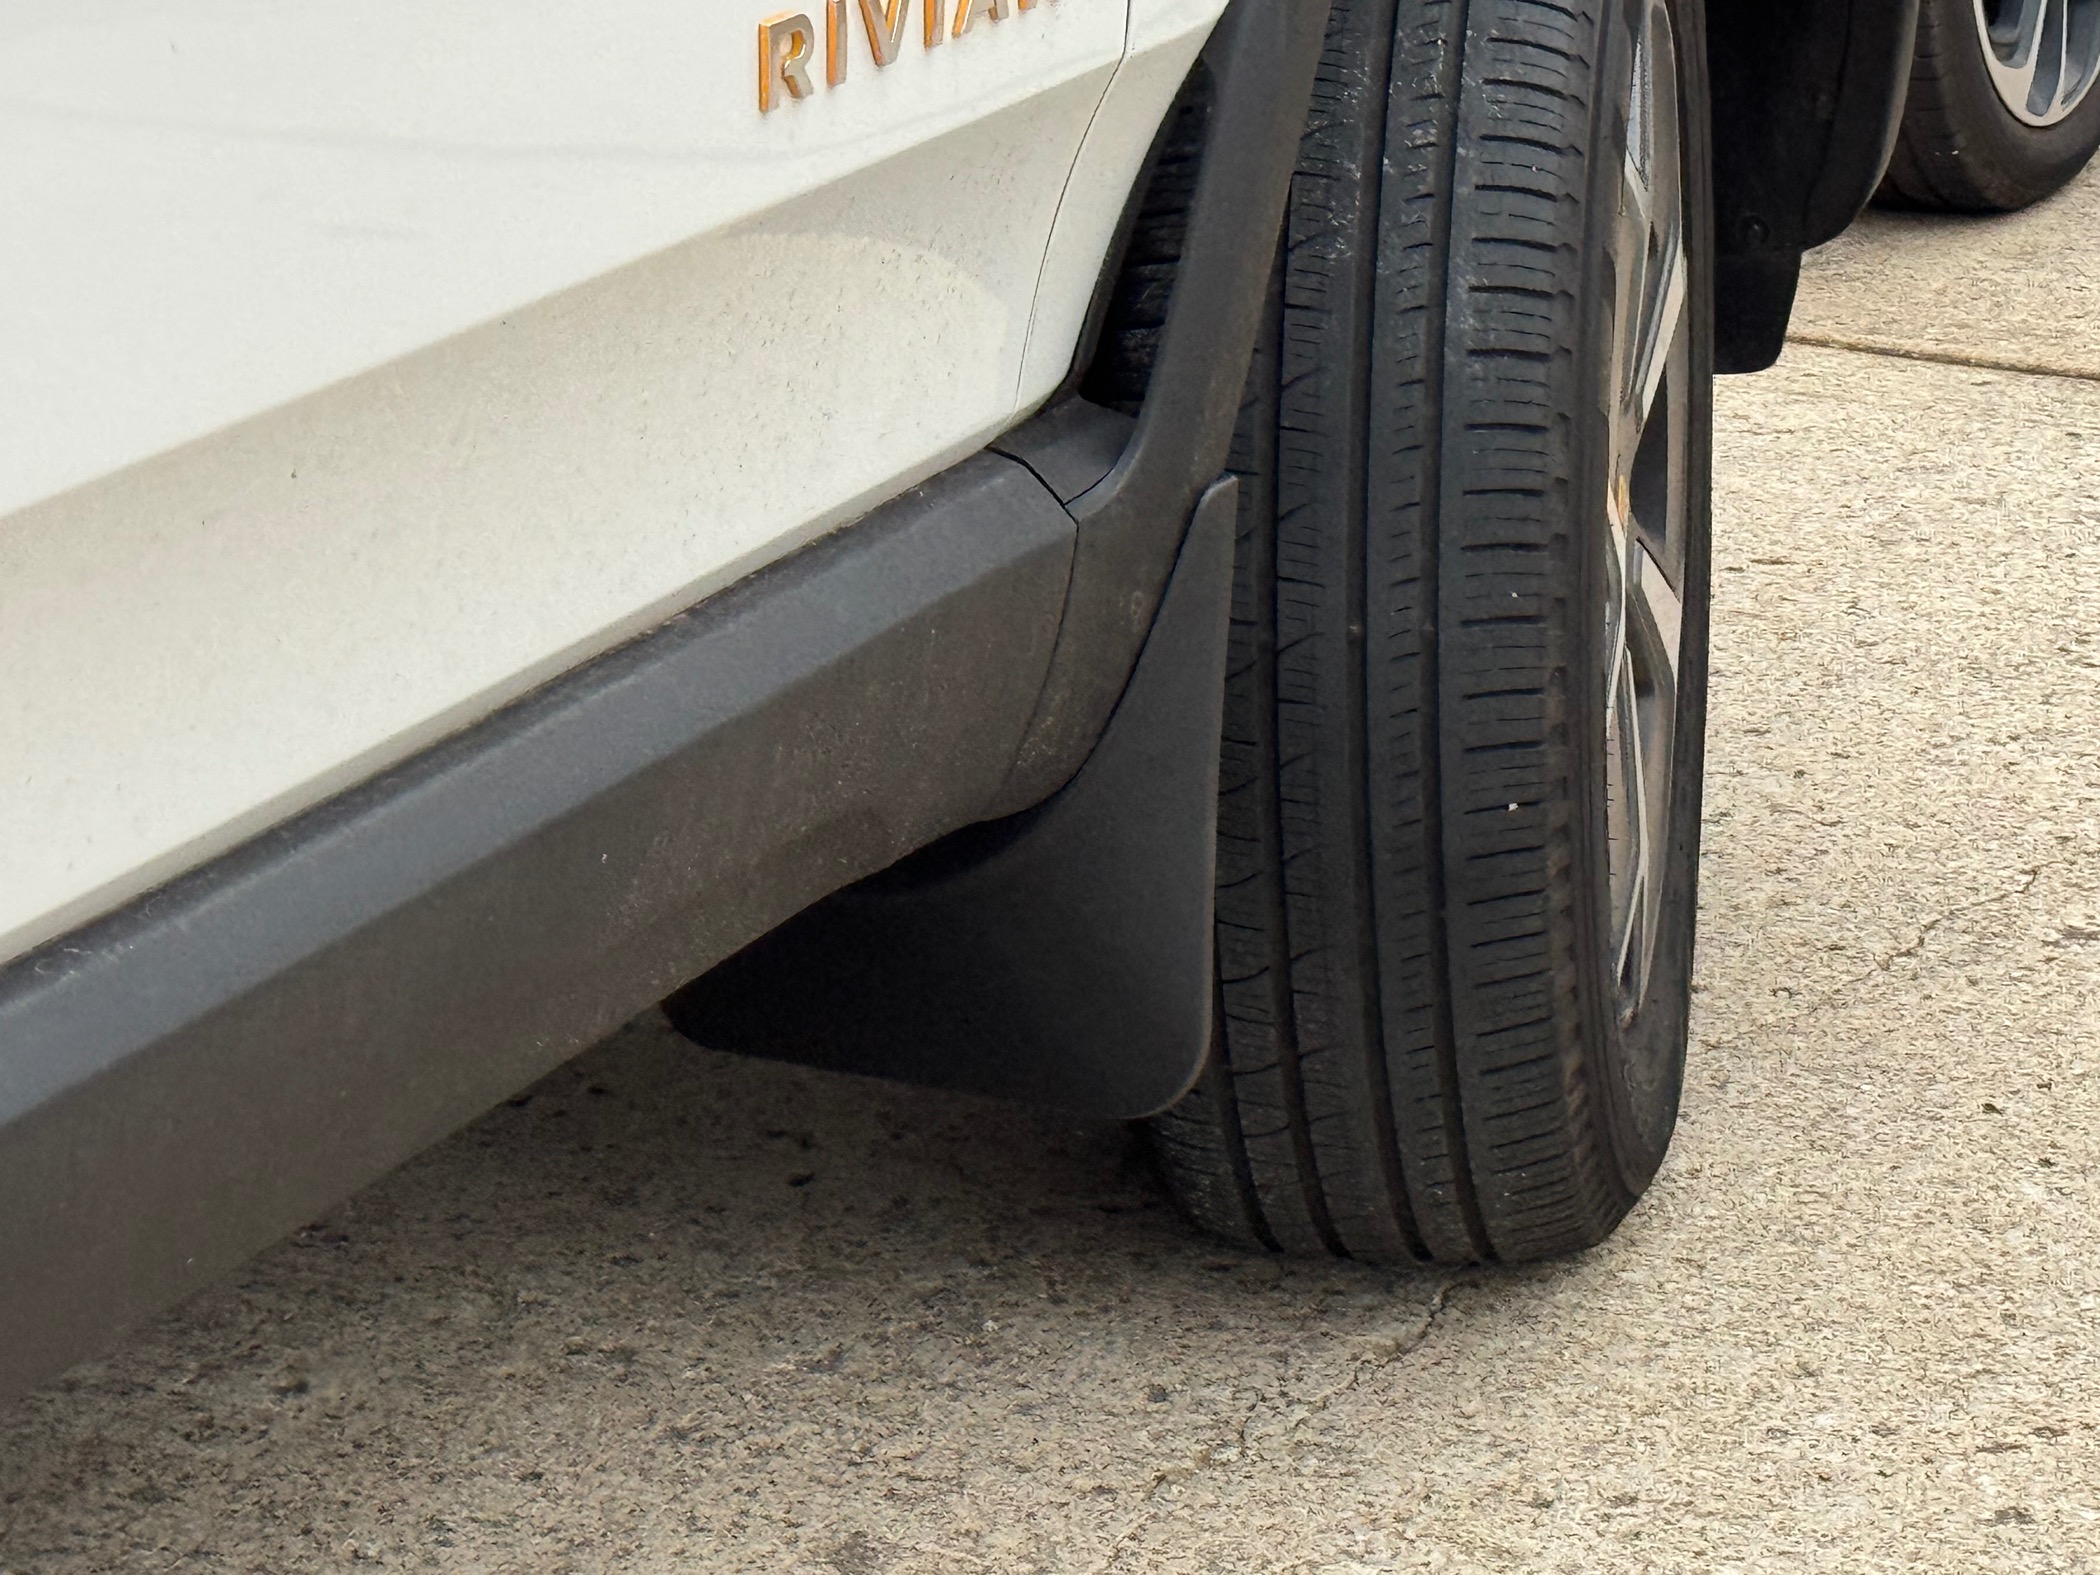 Rivian R1T R1S BestEvMod Mud Flaps for R1T Available Now IMG_3393